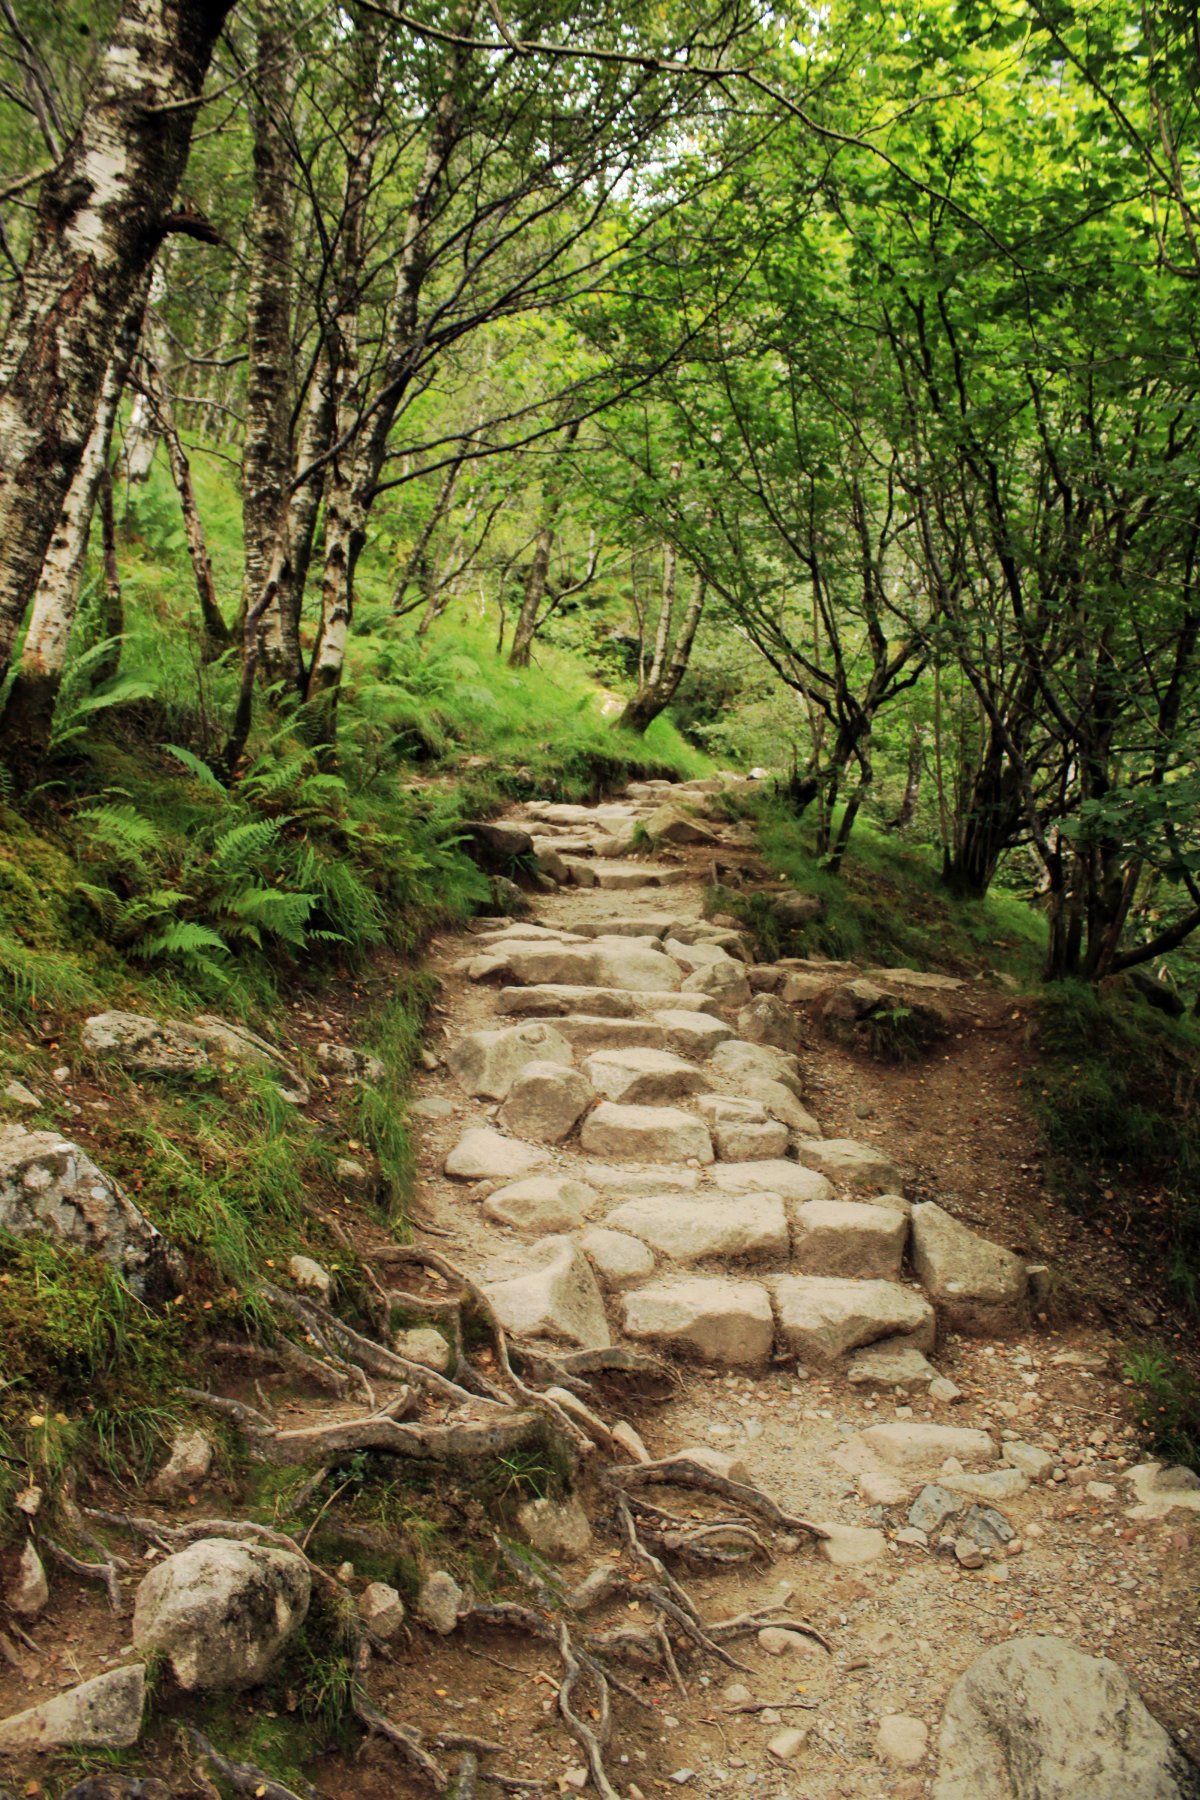 Scenic pictures of stone steps in alpine woods